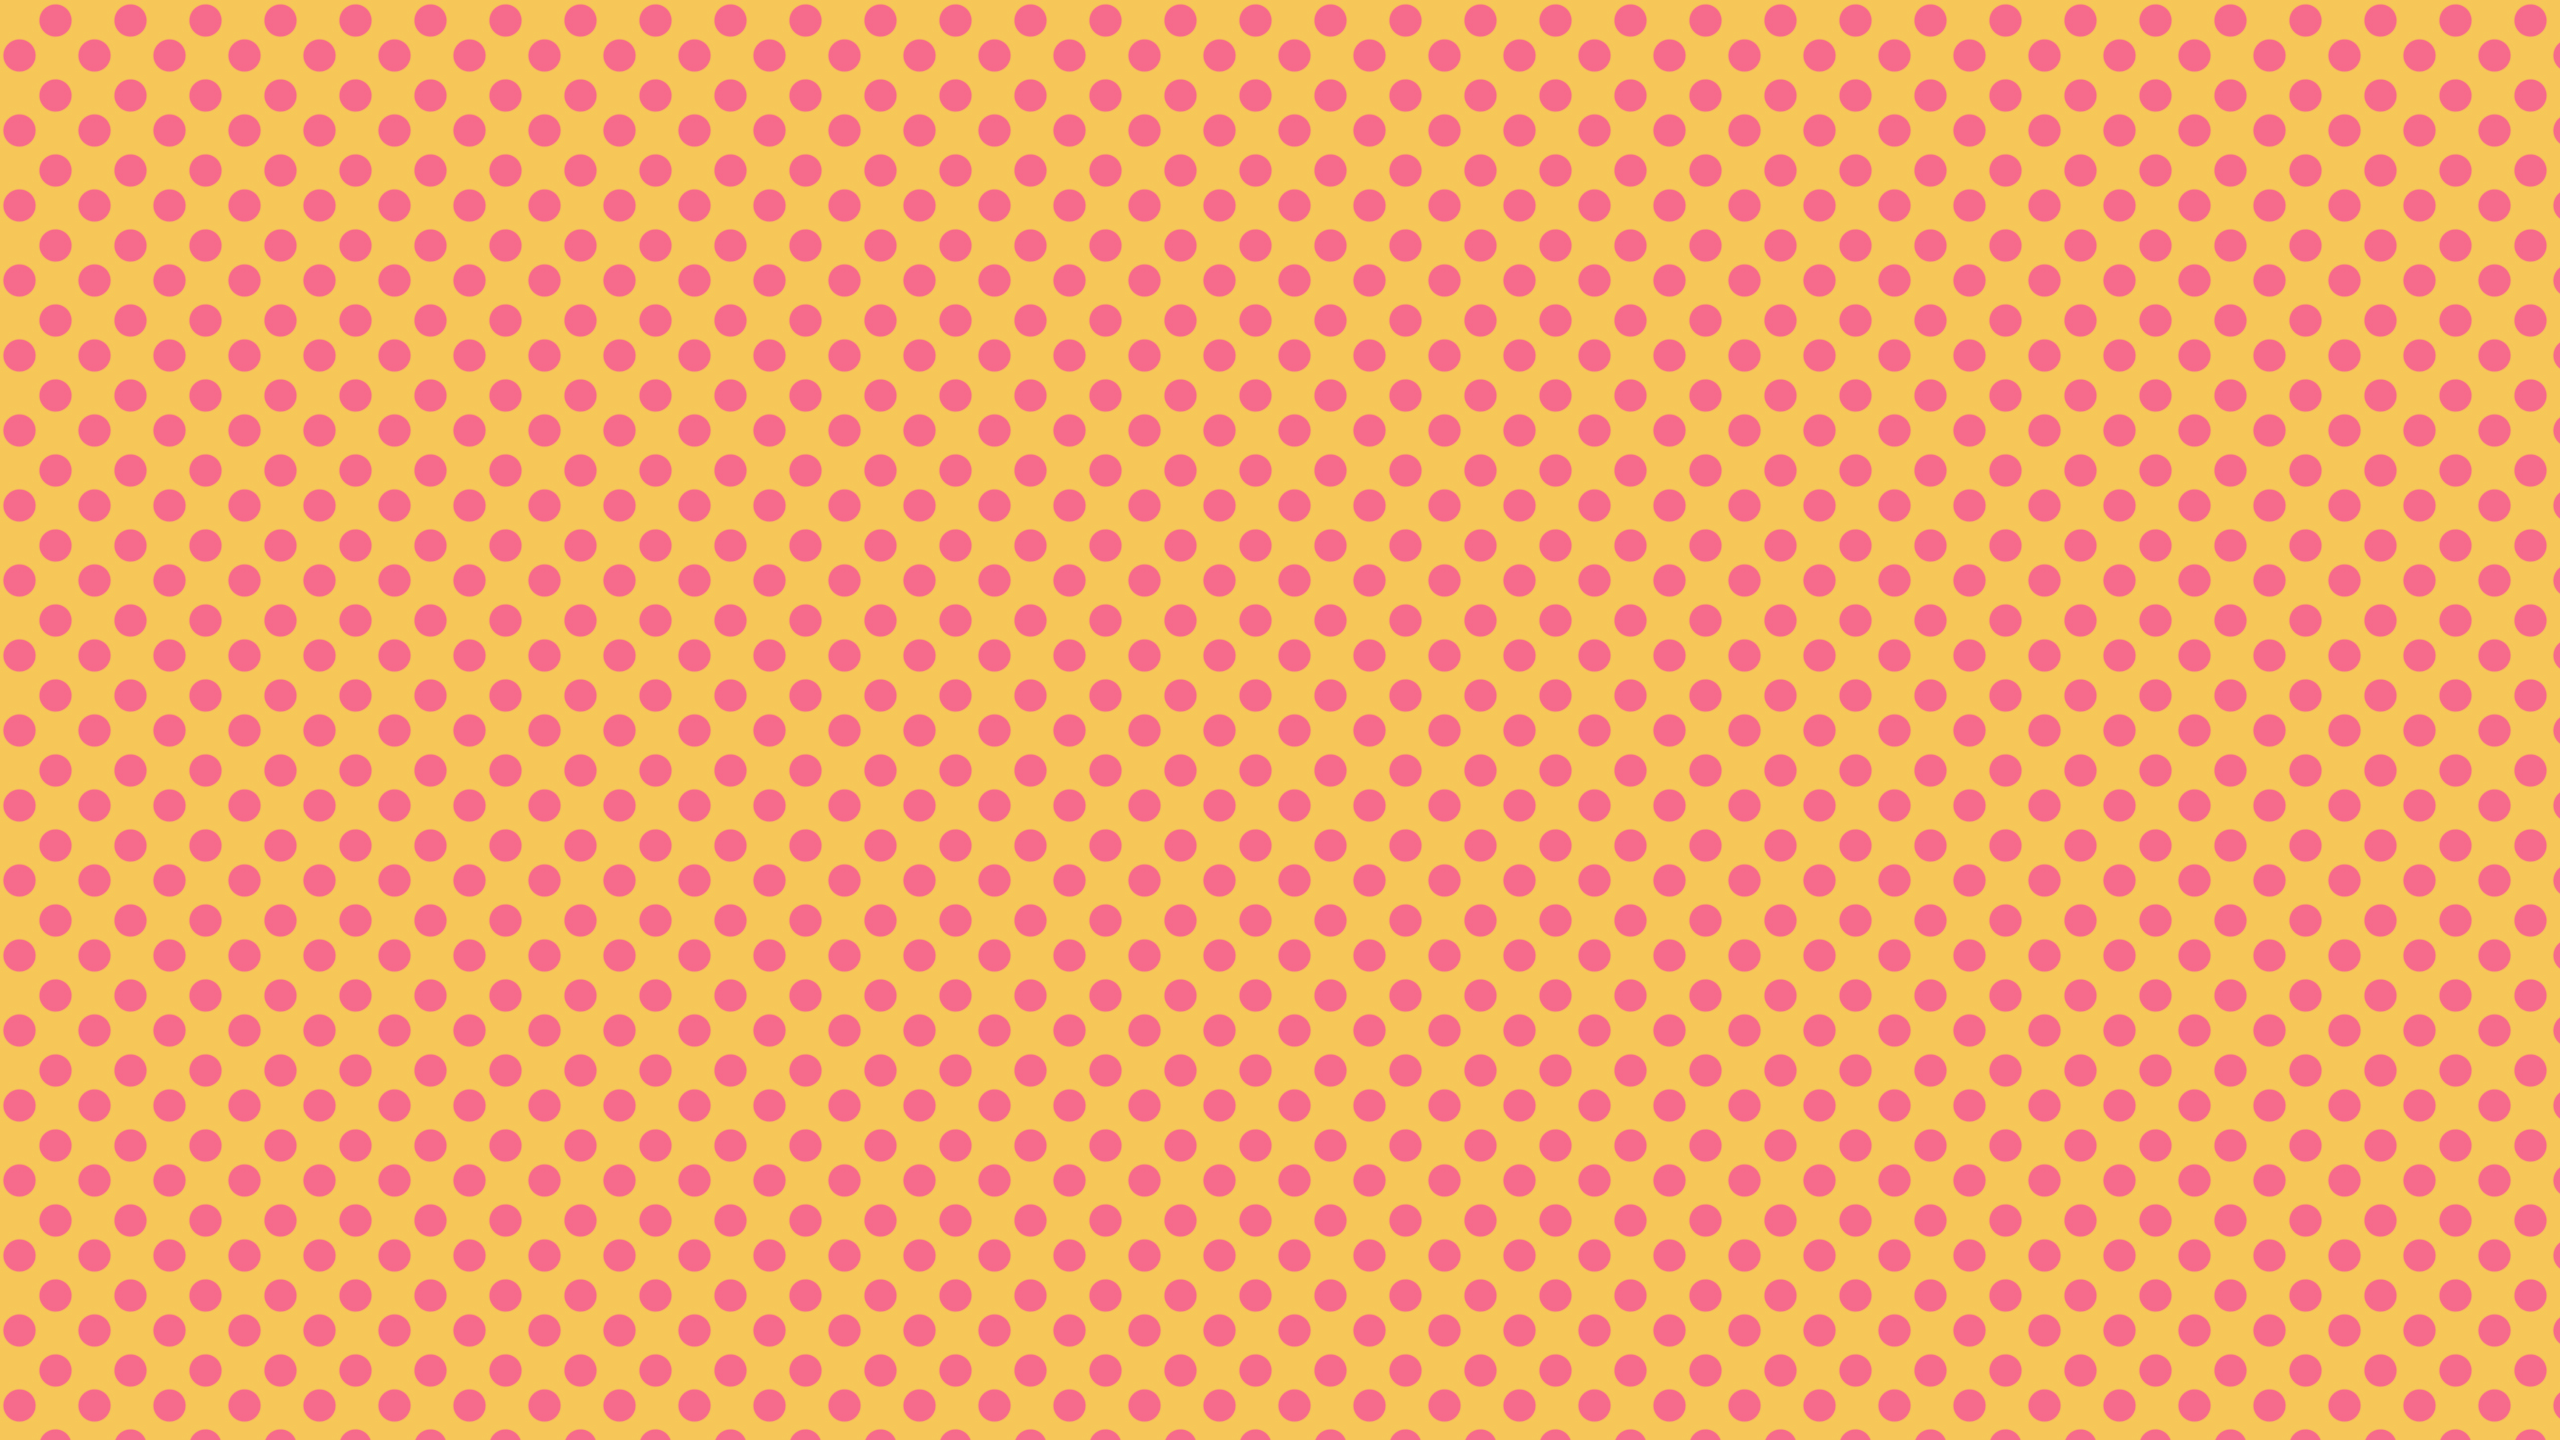 This Polka Dots Desktop Wallpaper Is Easy Just Save The